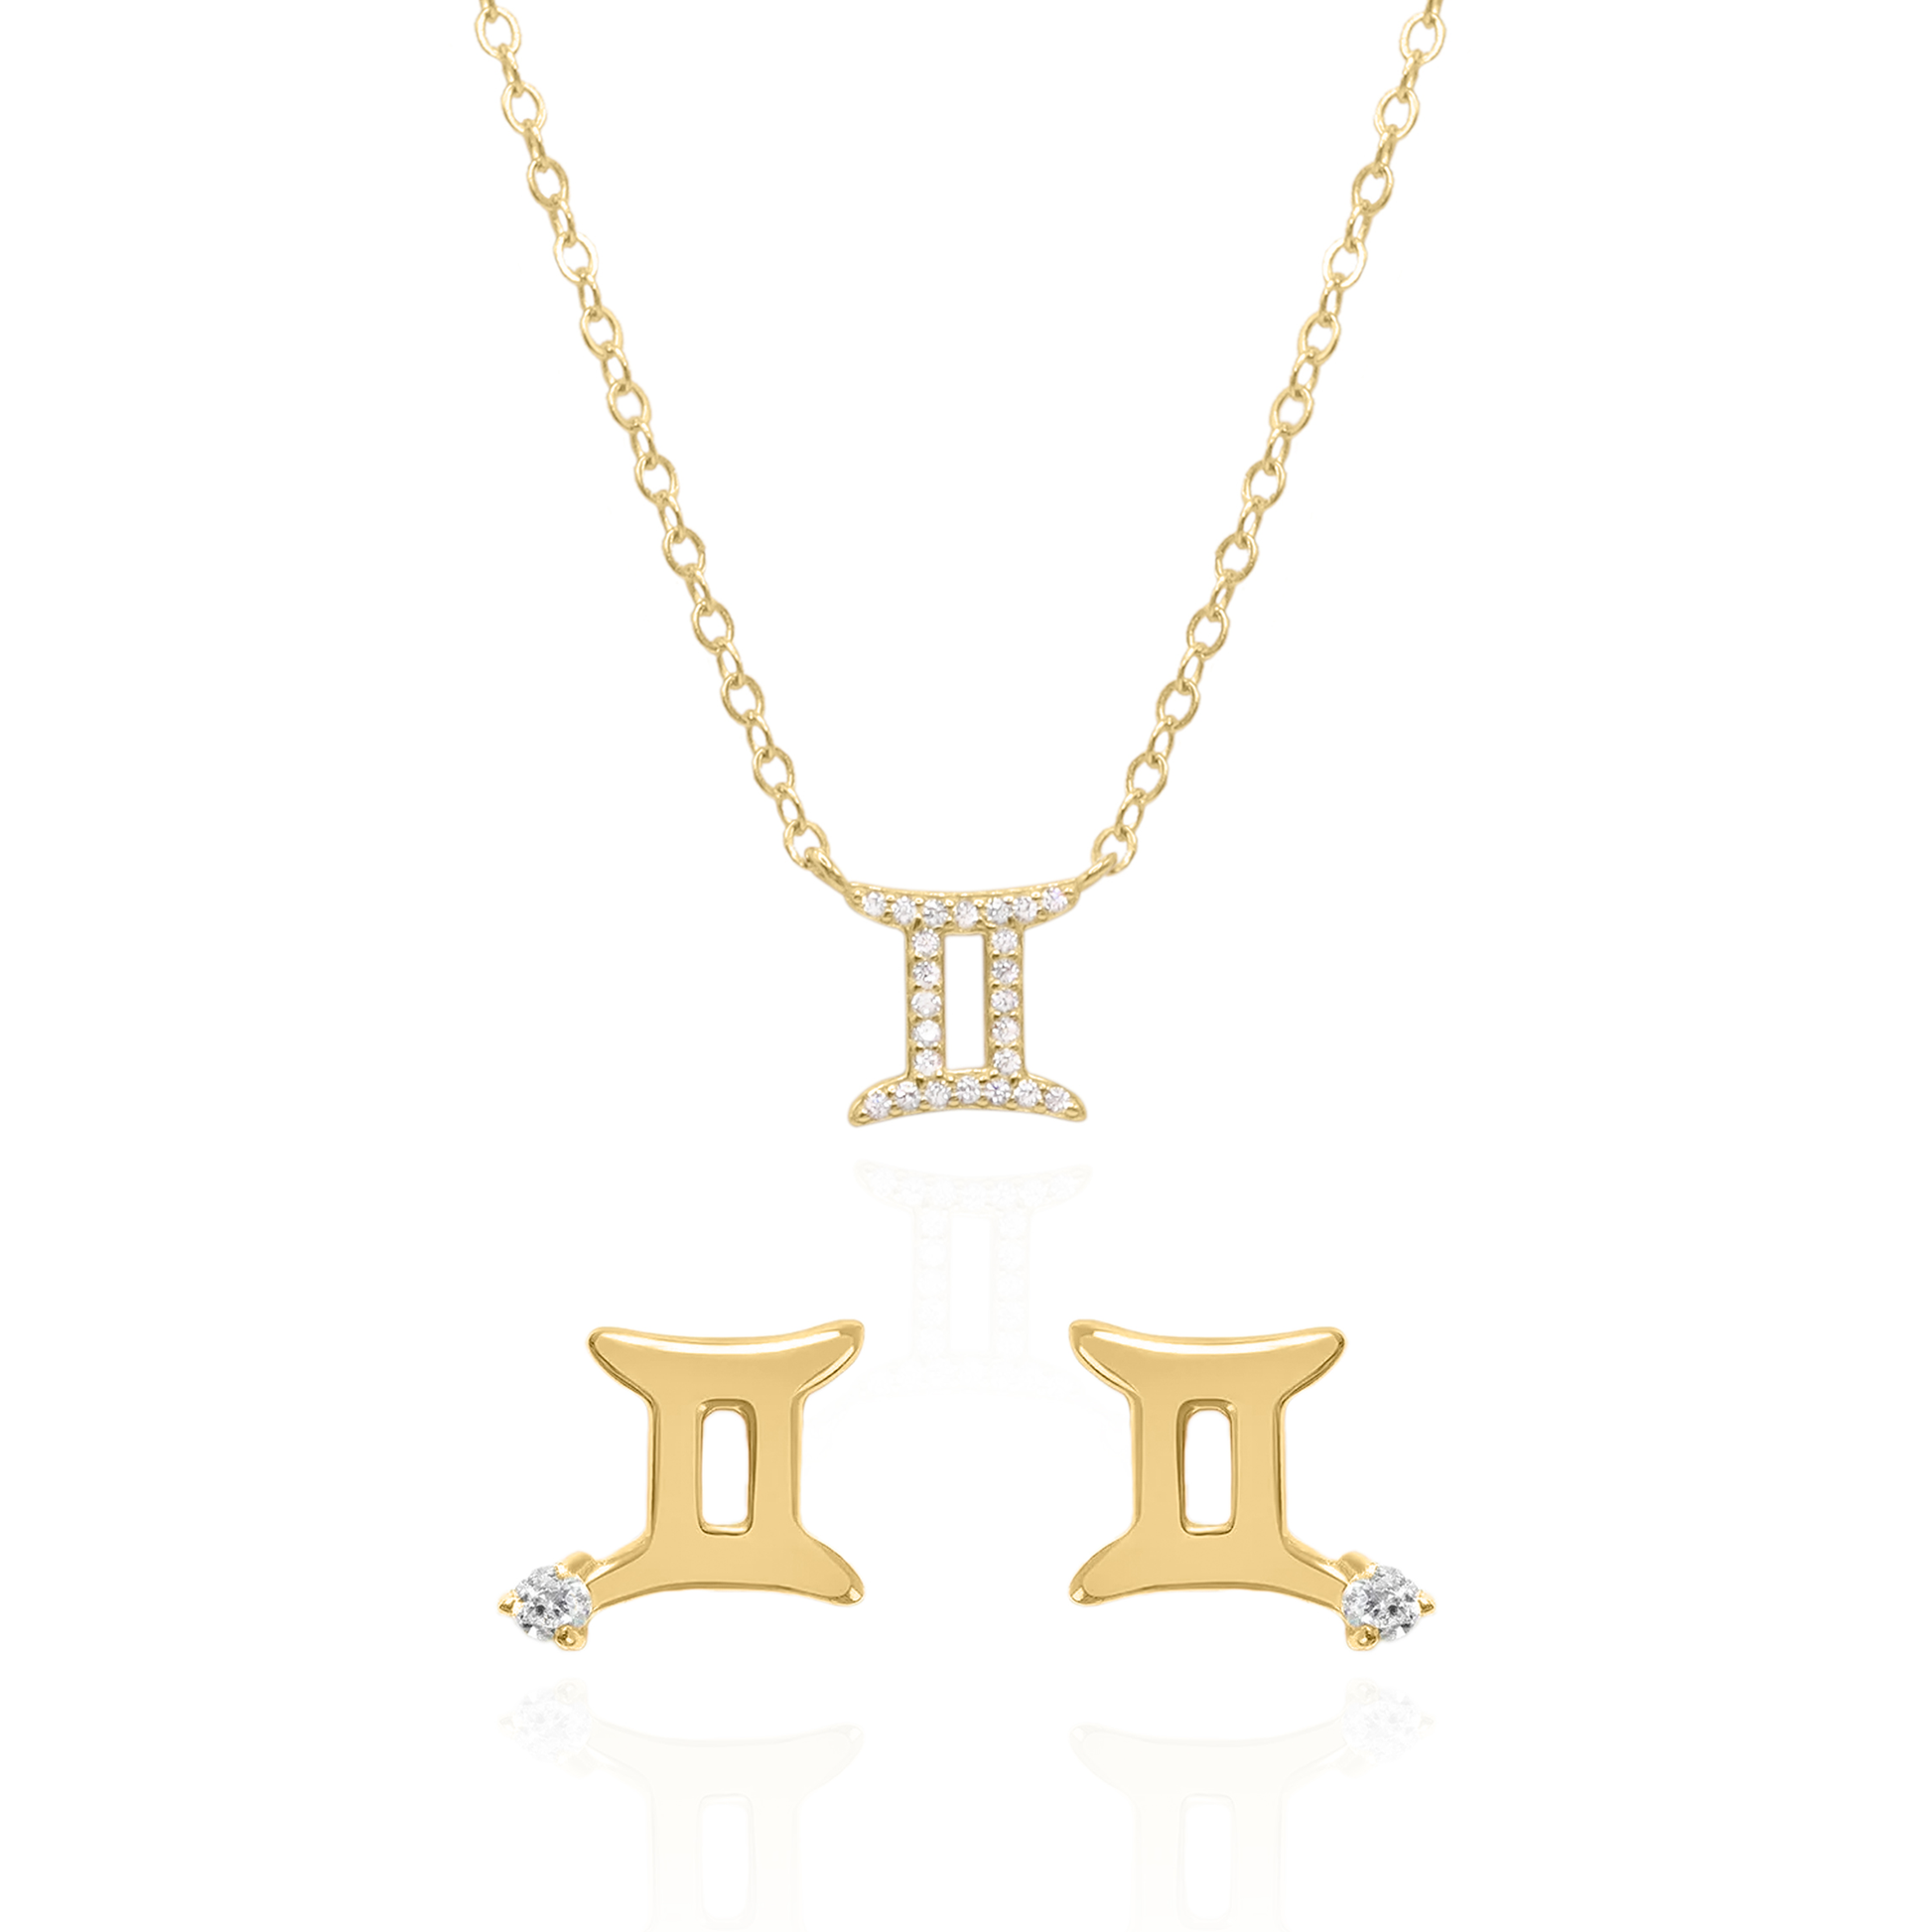 Zodiac Symbol Gift Set | Stud Earrings & Necklace | 18K Gold Plated